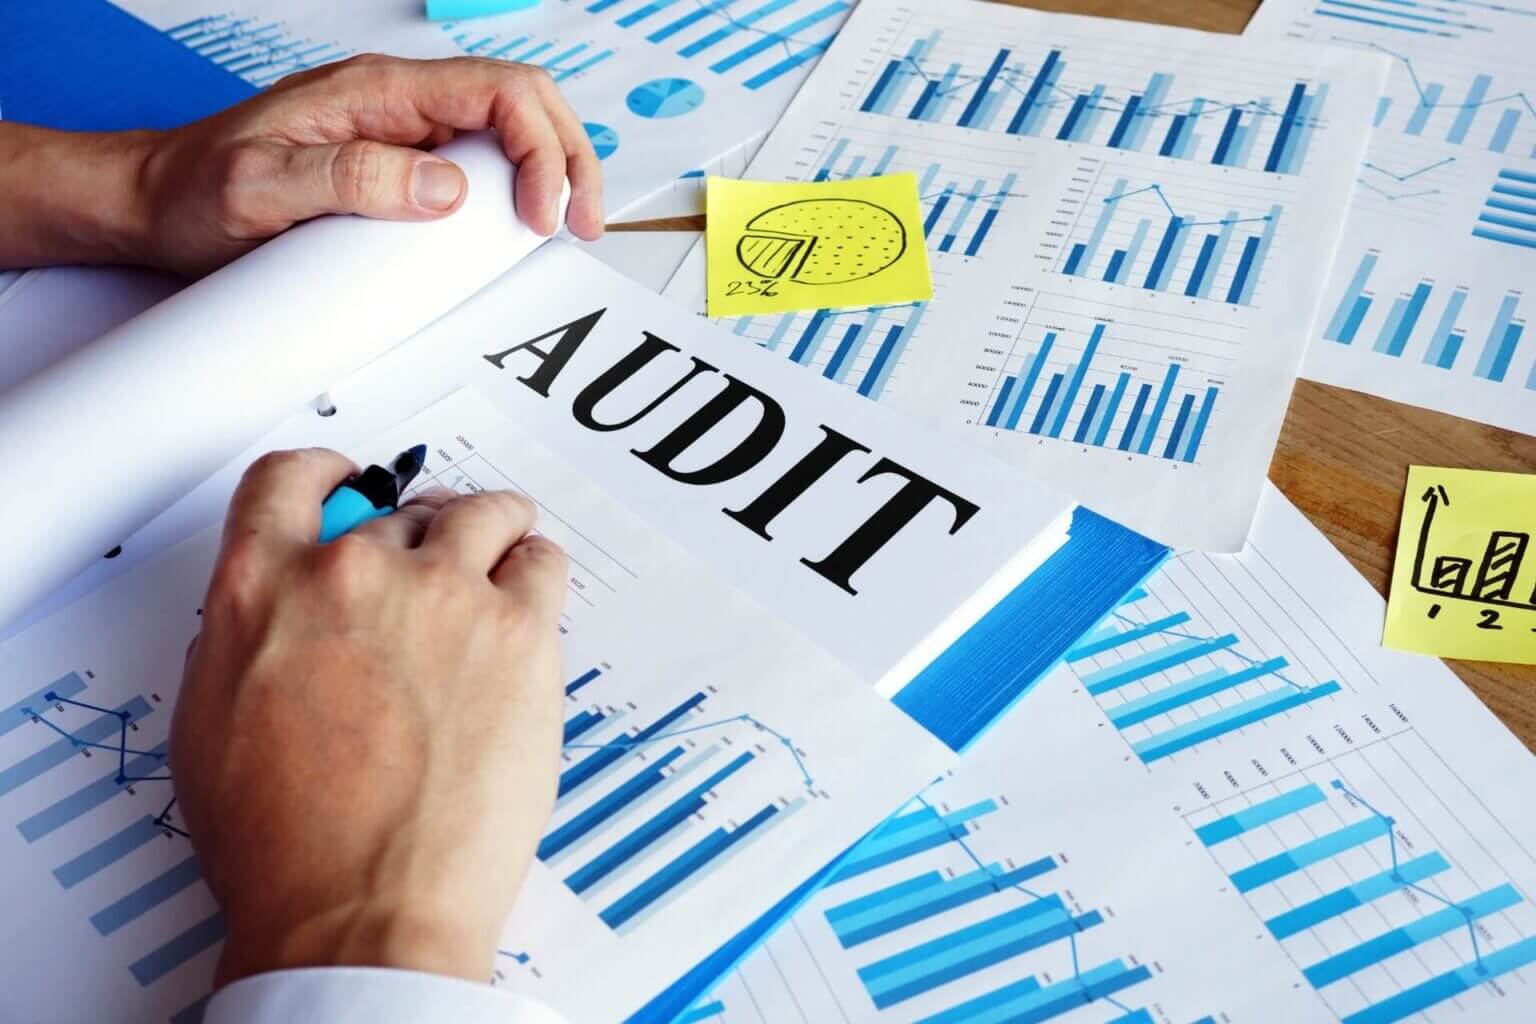 How To Create A Good Internal Audit Report In Dubai?